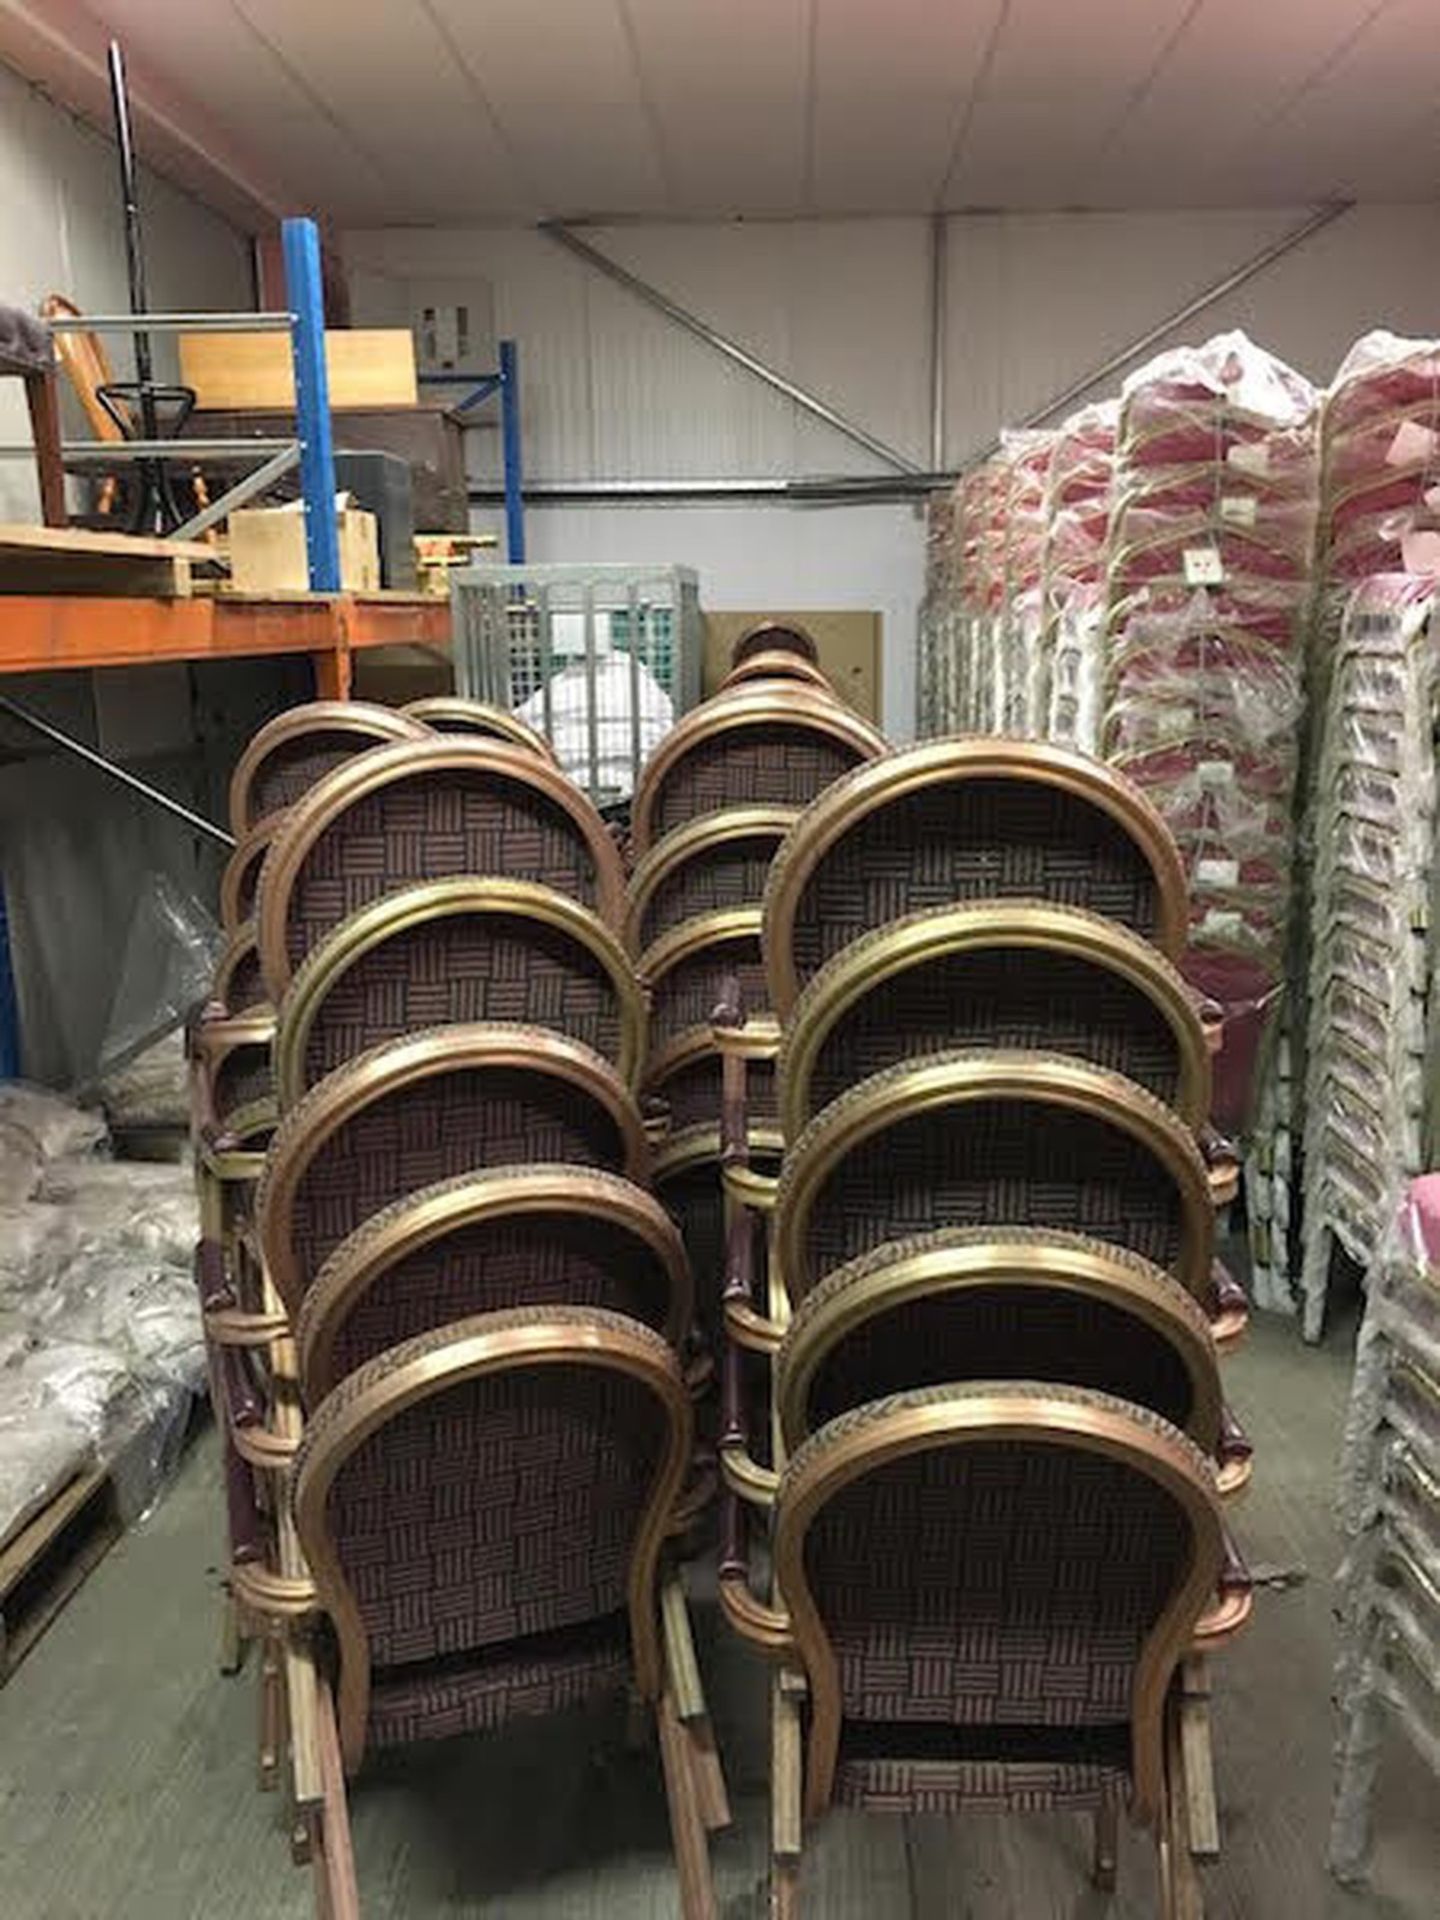 66 x Burgess Armed Aluminium Stacking Banqueting Chairs in Good condition bronze framework check - Image 2 of 2